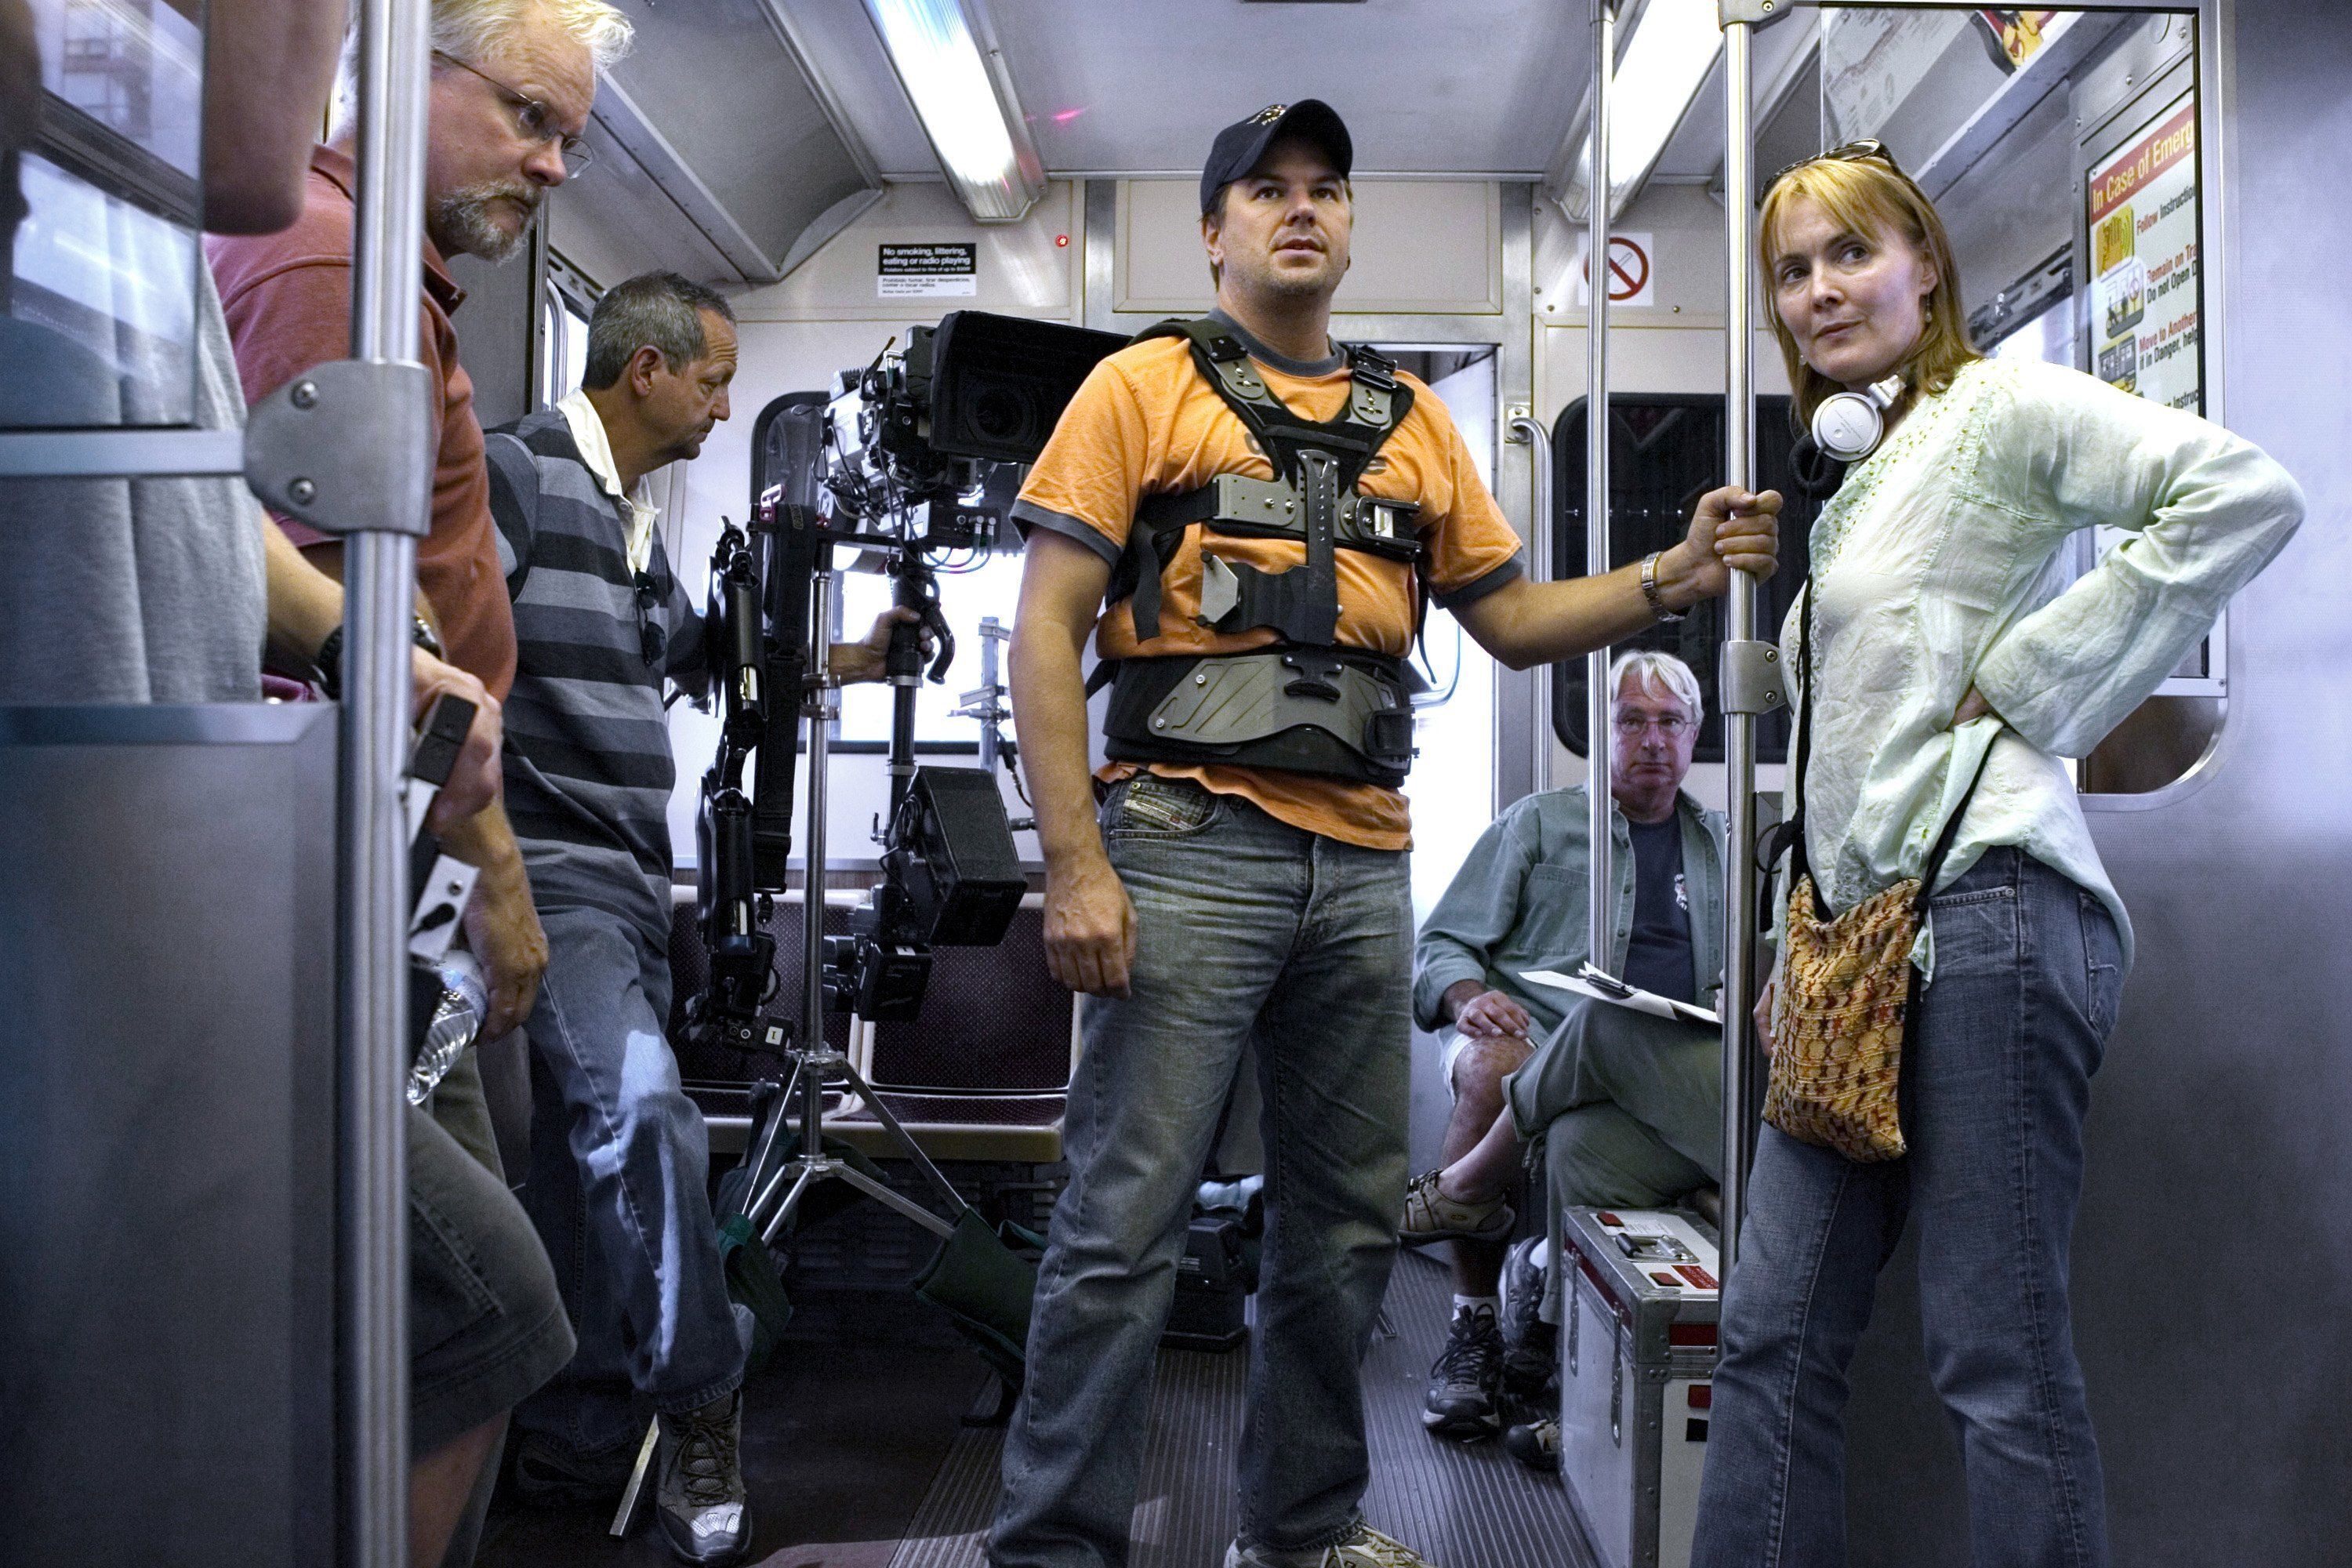 Staffers stand in a subway car ready to shoot a scene from ER